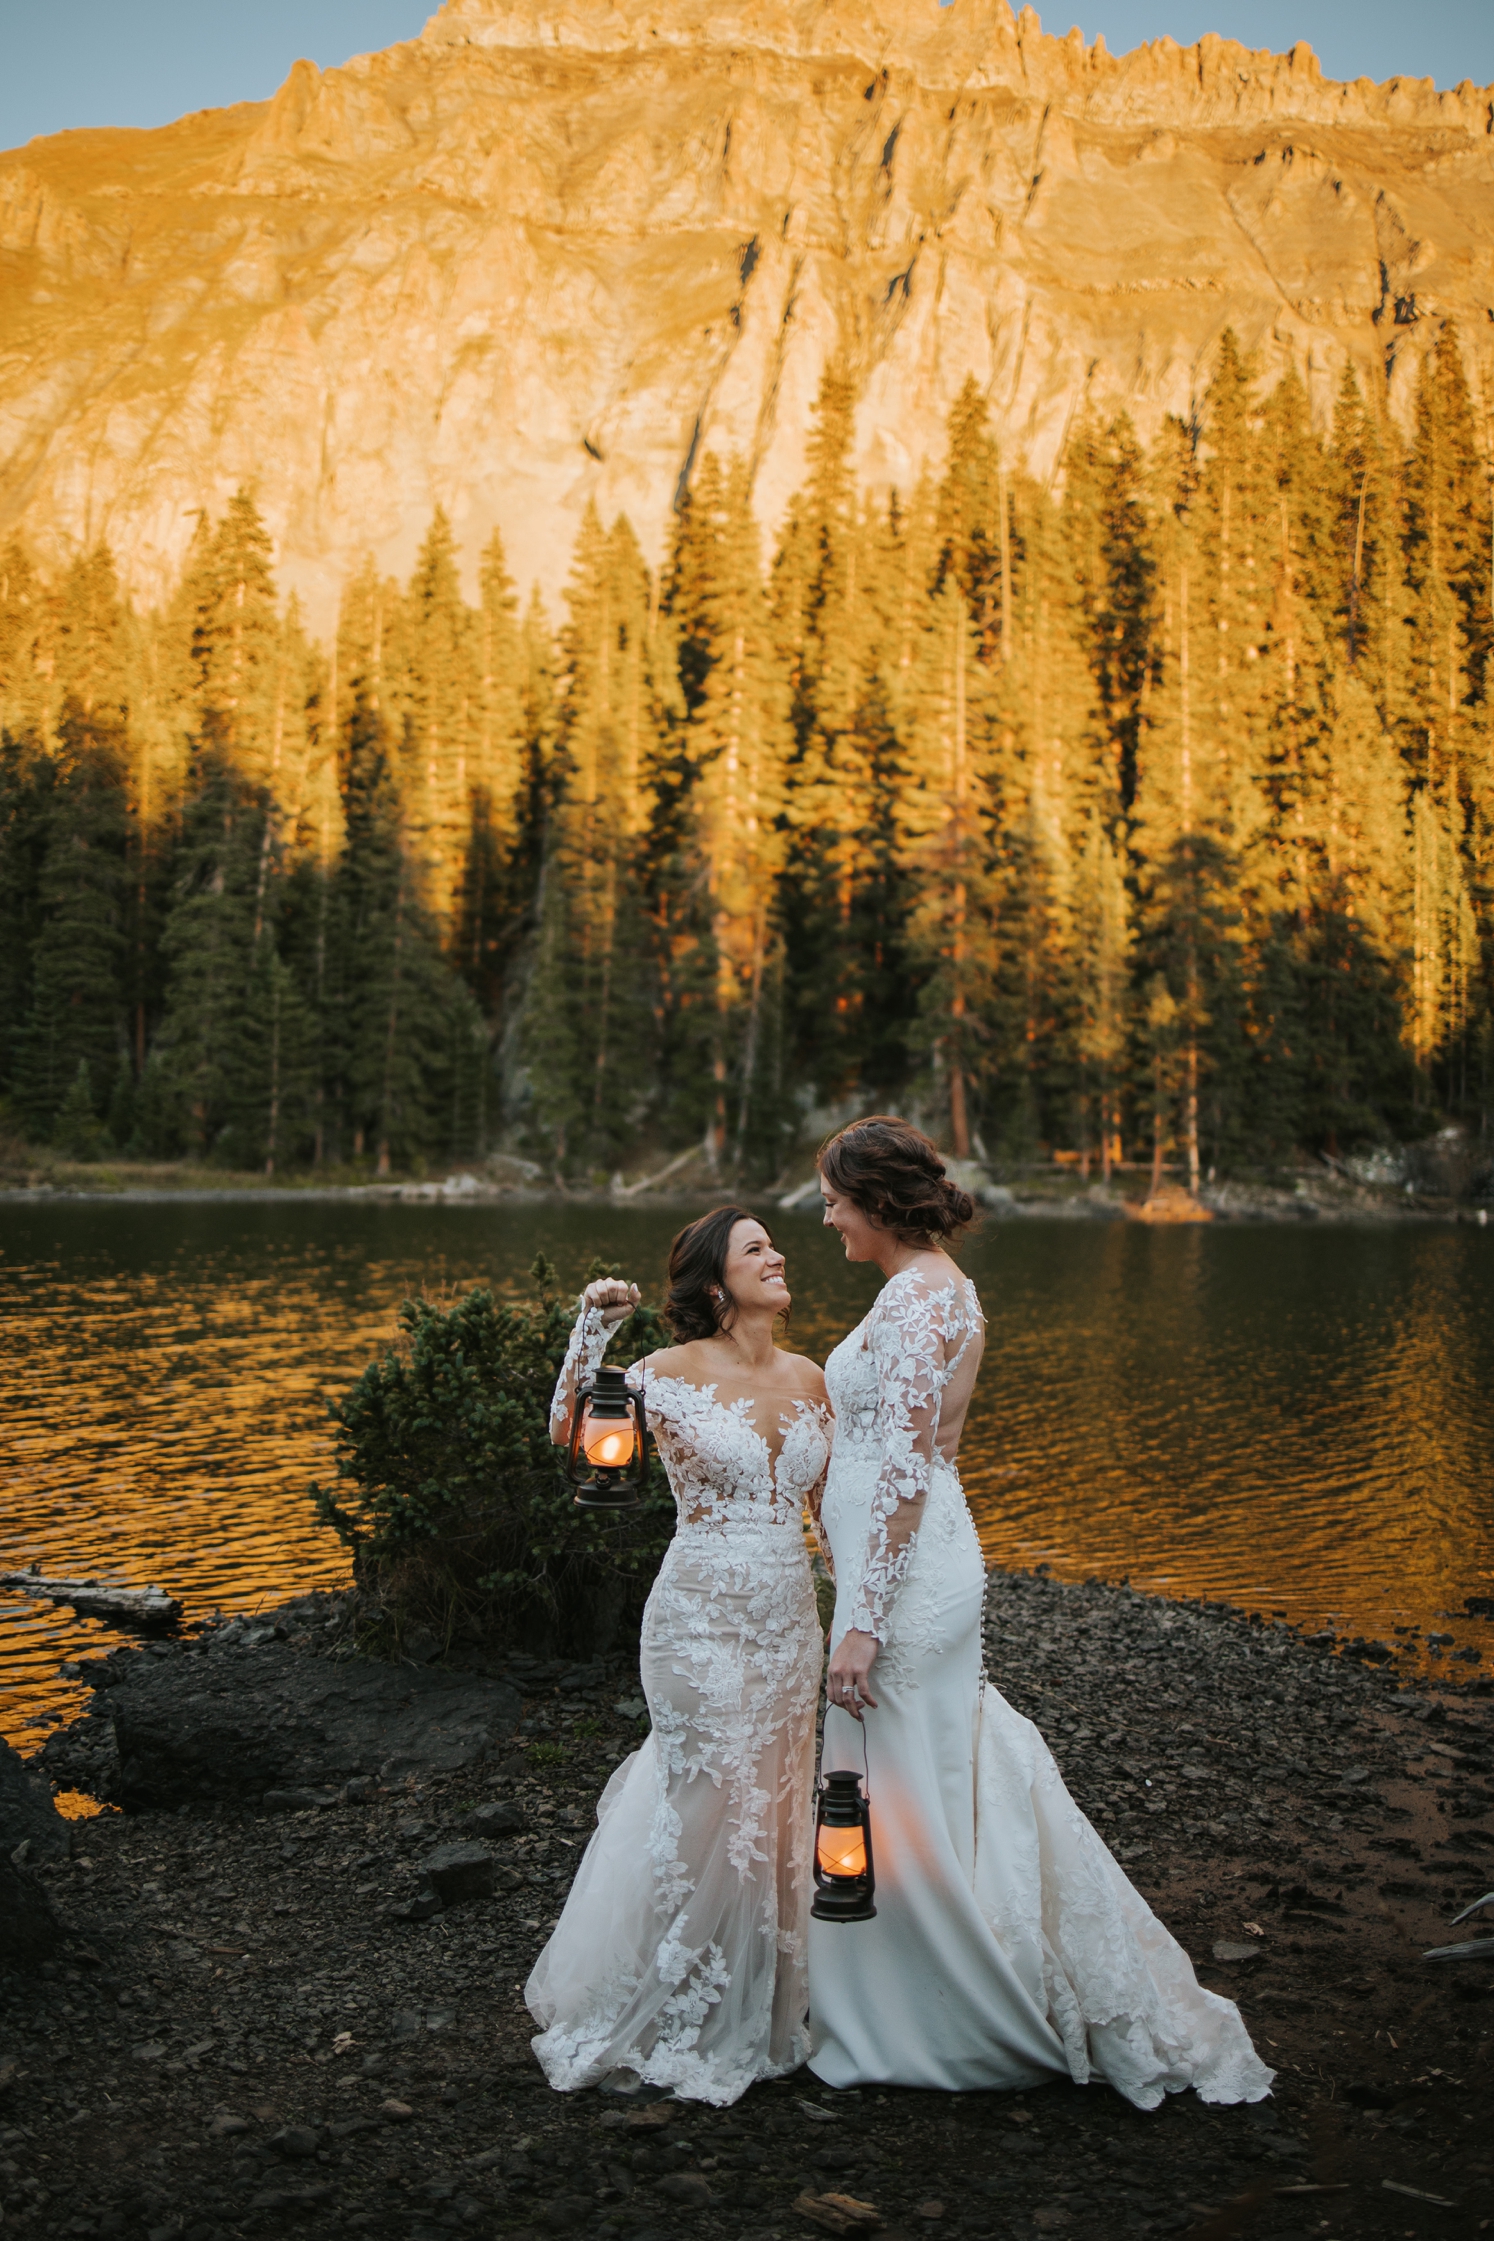 Partners holding lanterns and standing lakeside at Telluride wedding | McArthur Weddings and Events